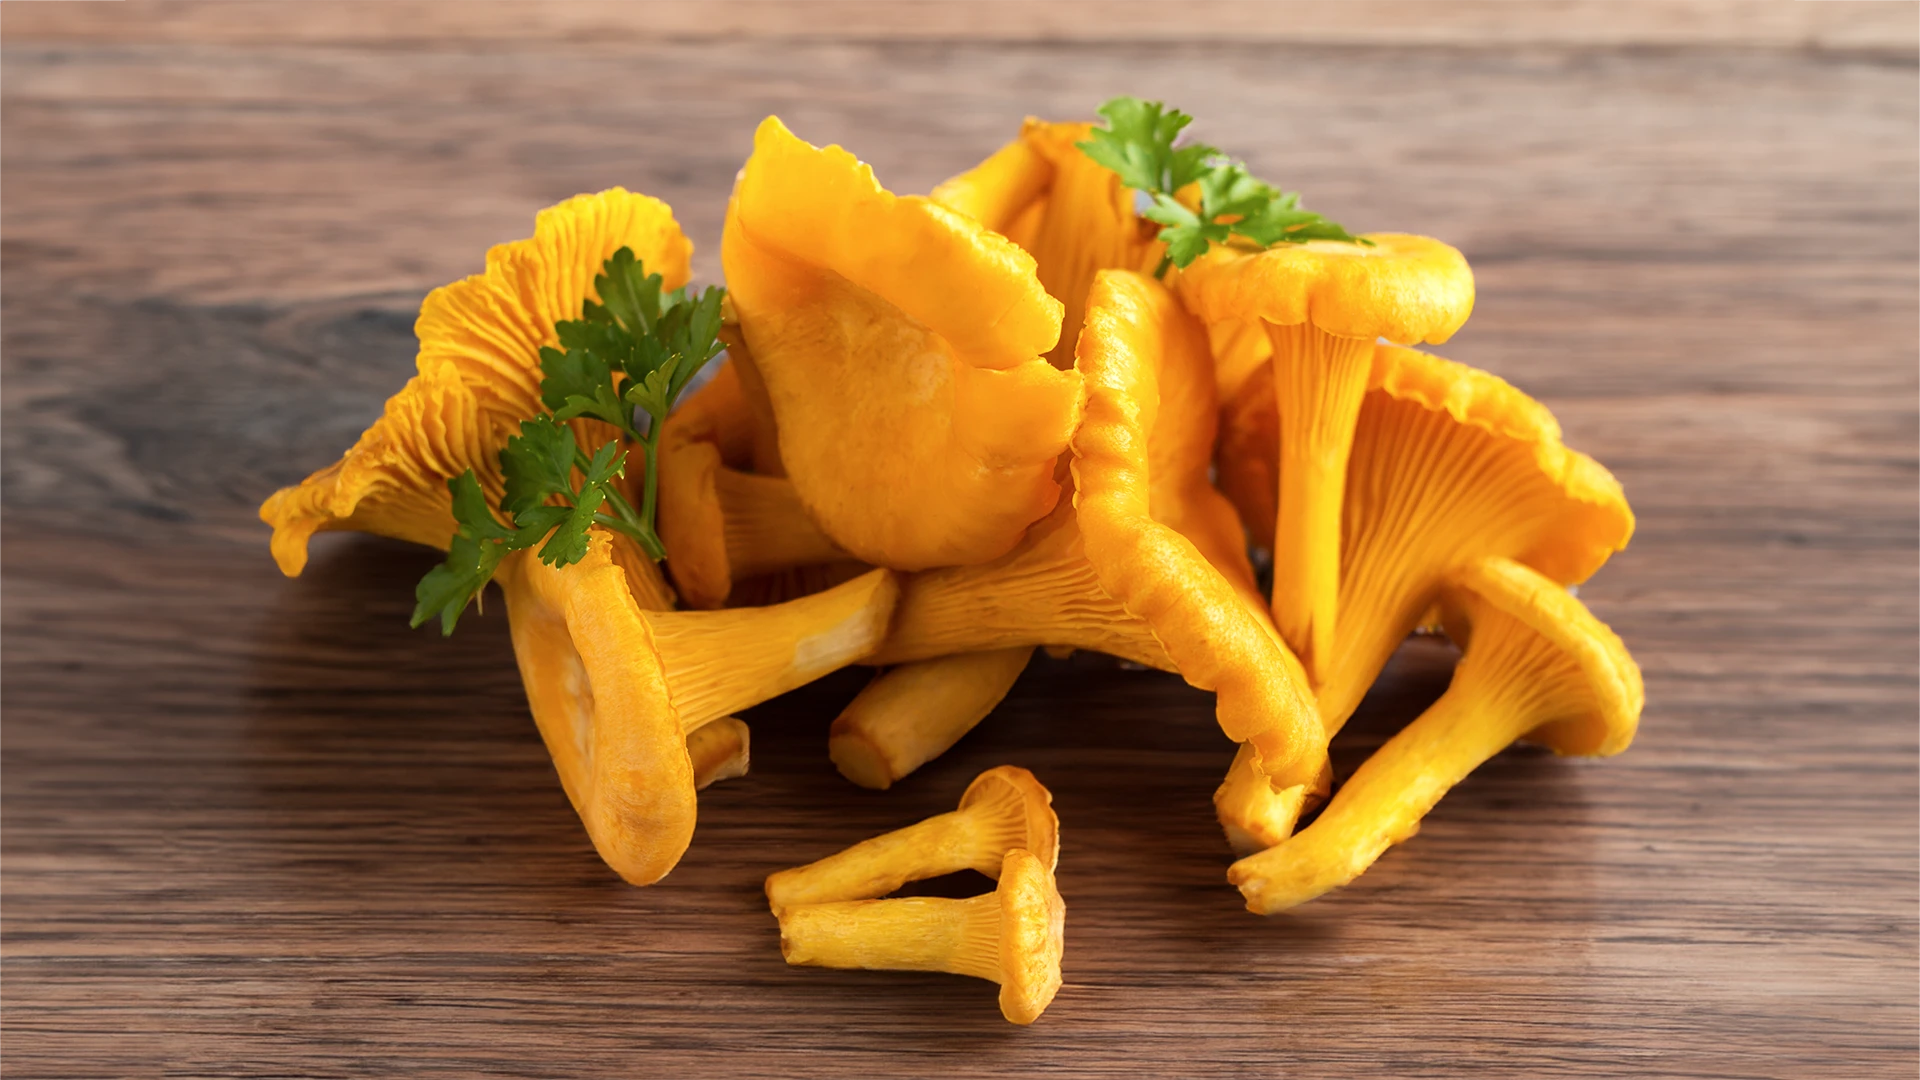 Chanterelle mushrooms: A prebiotic packed with vitamin D and fiber